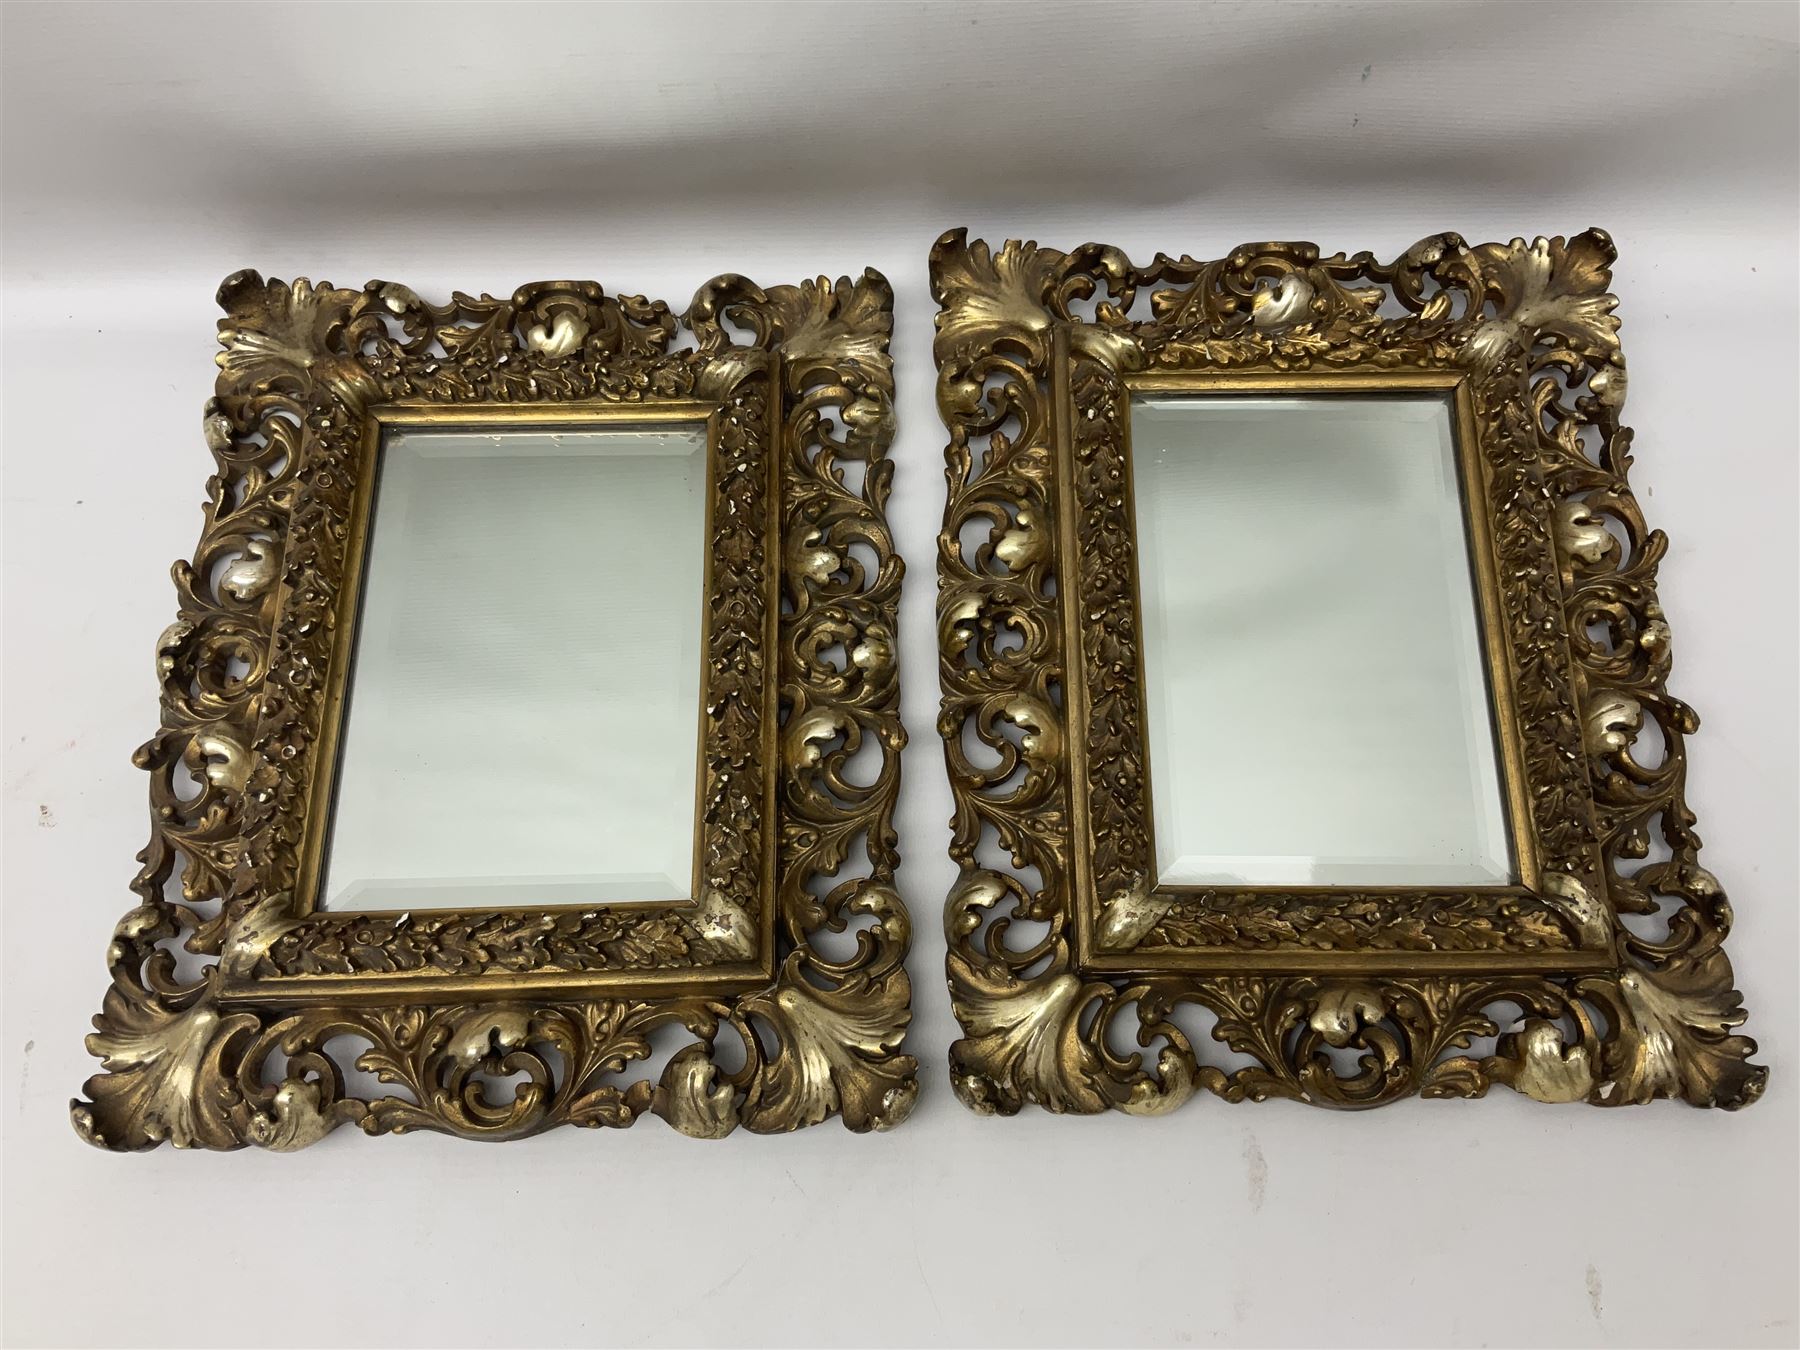 Pair of Florentine carved giltwood mirrors - Image 2 of 11